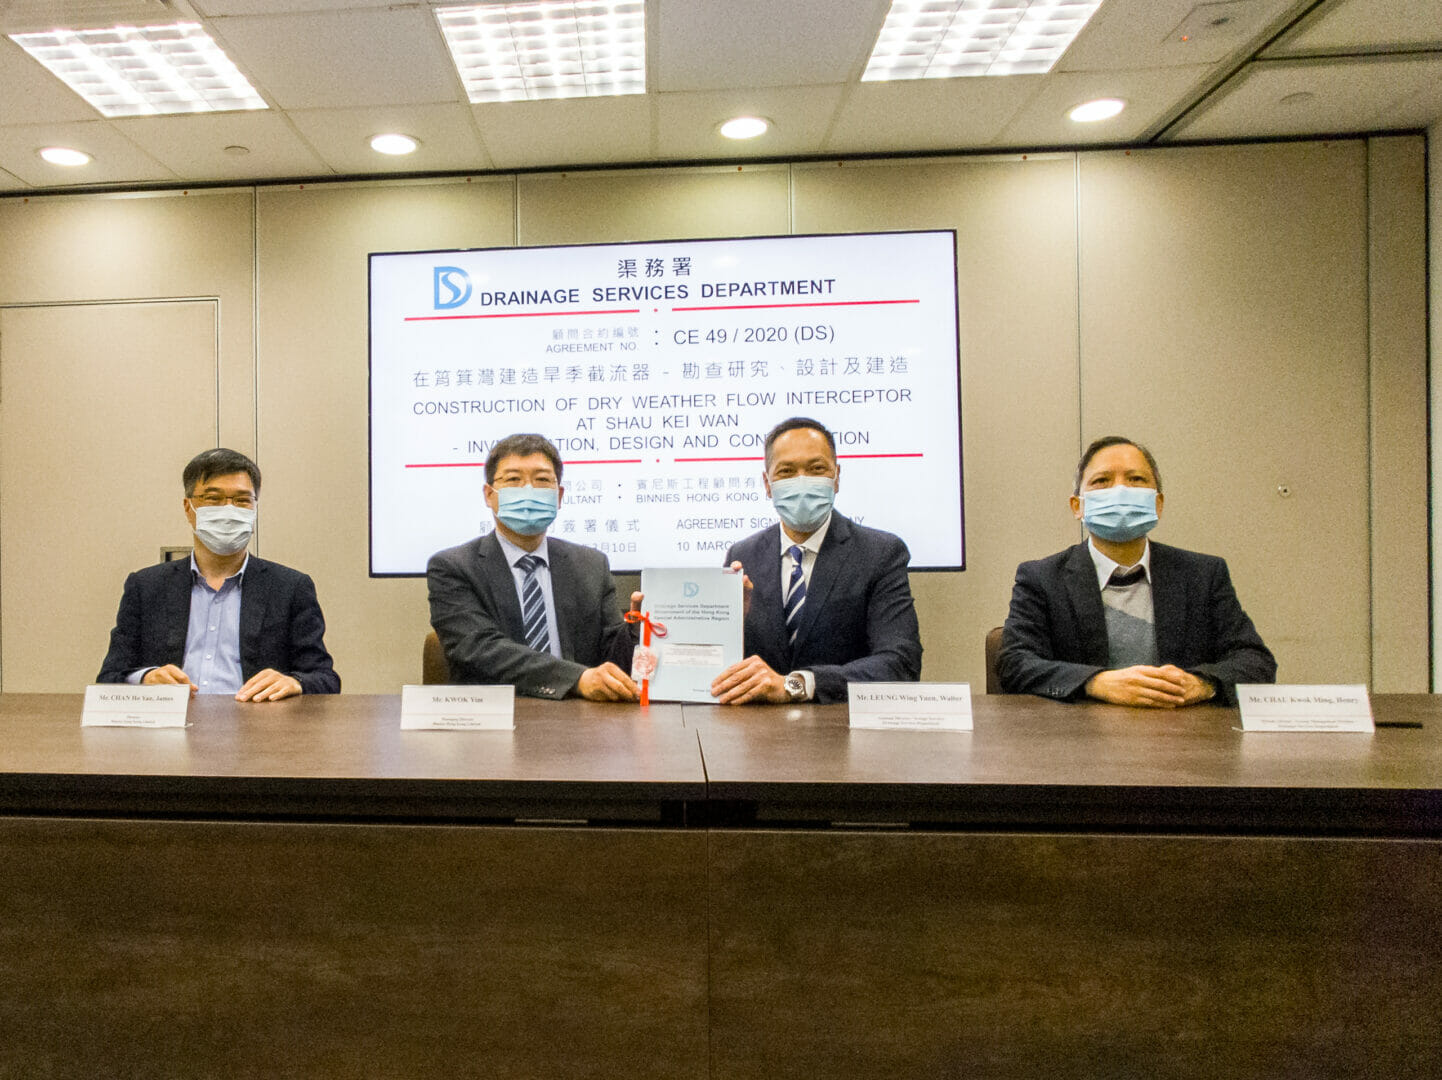 Binnies awarded new Drainage Services Department consultancy agreement to improve coastal water quality in Hong Kong